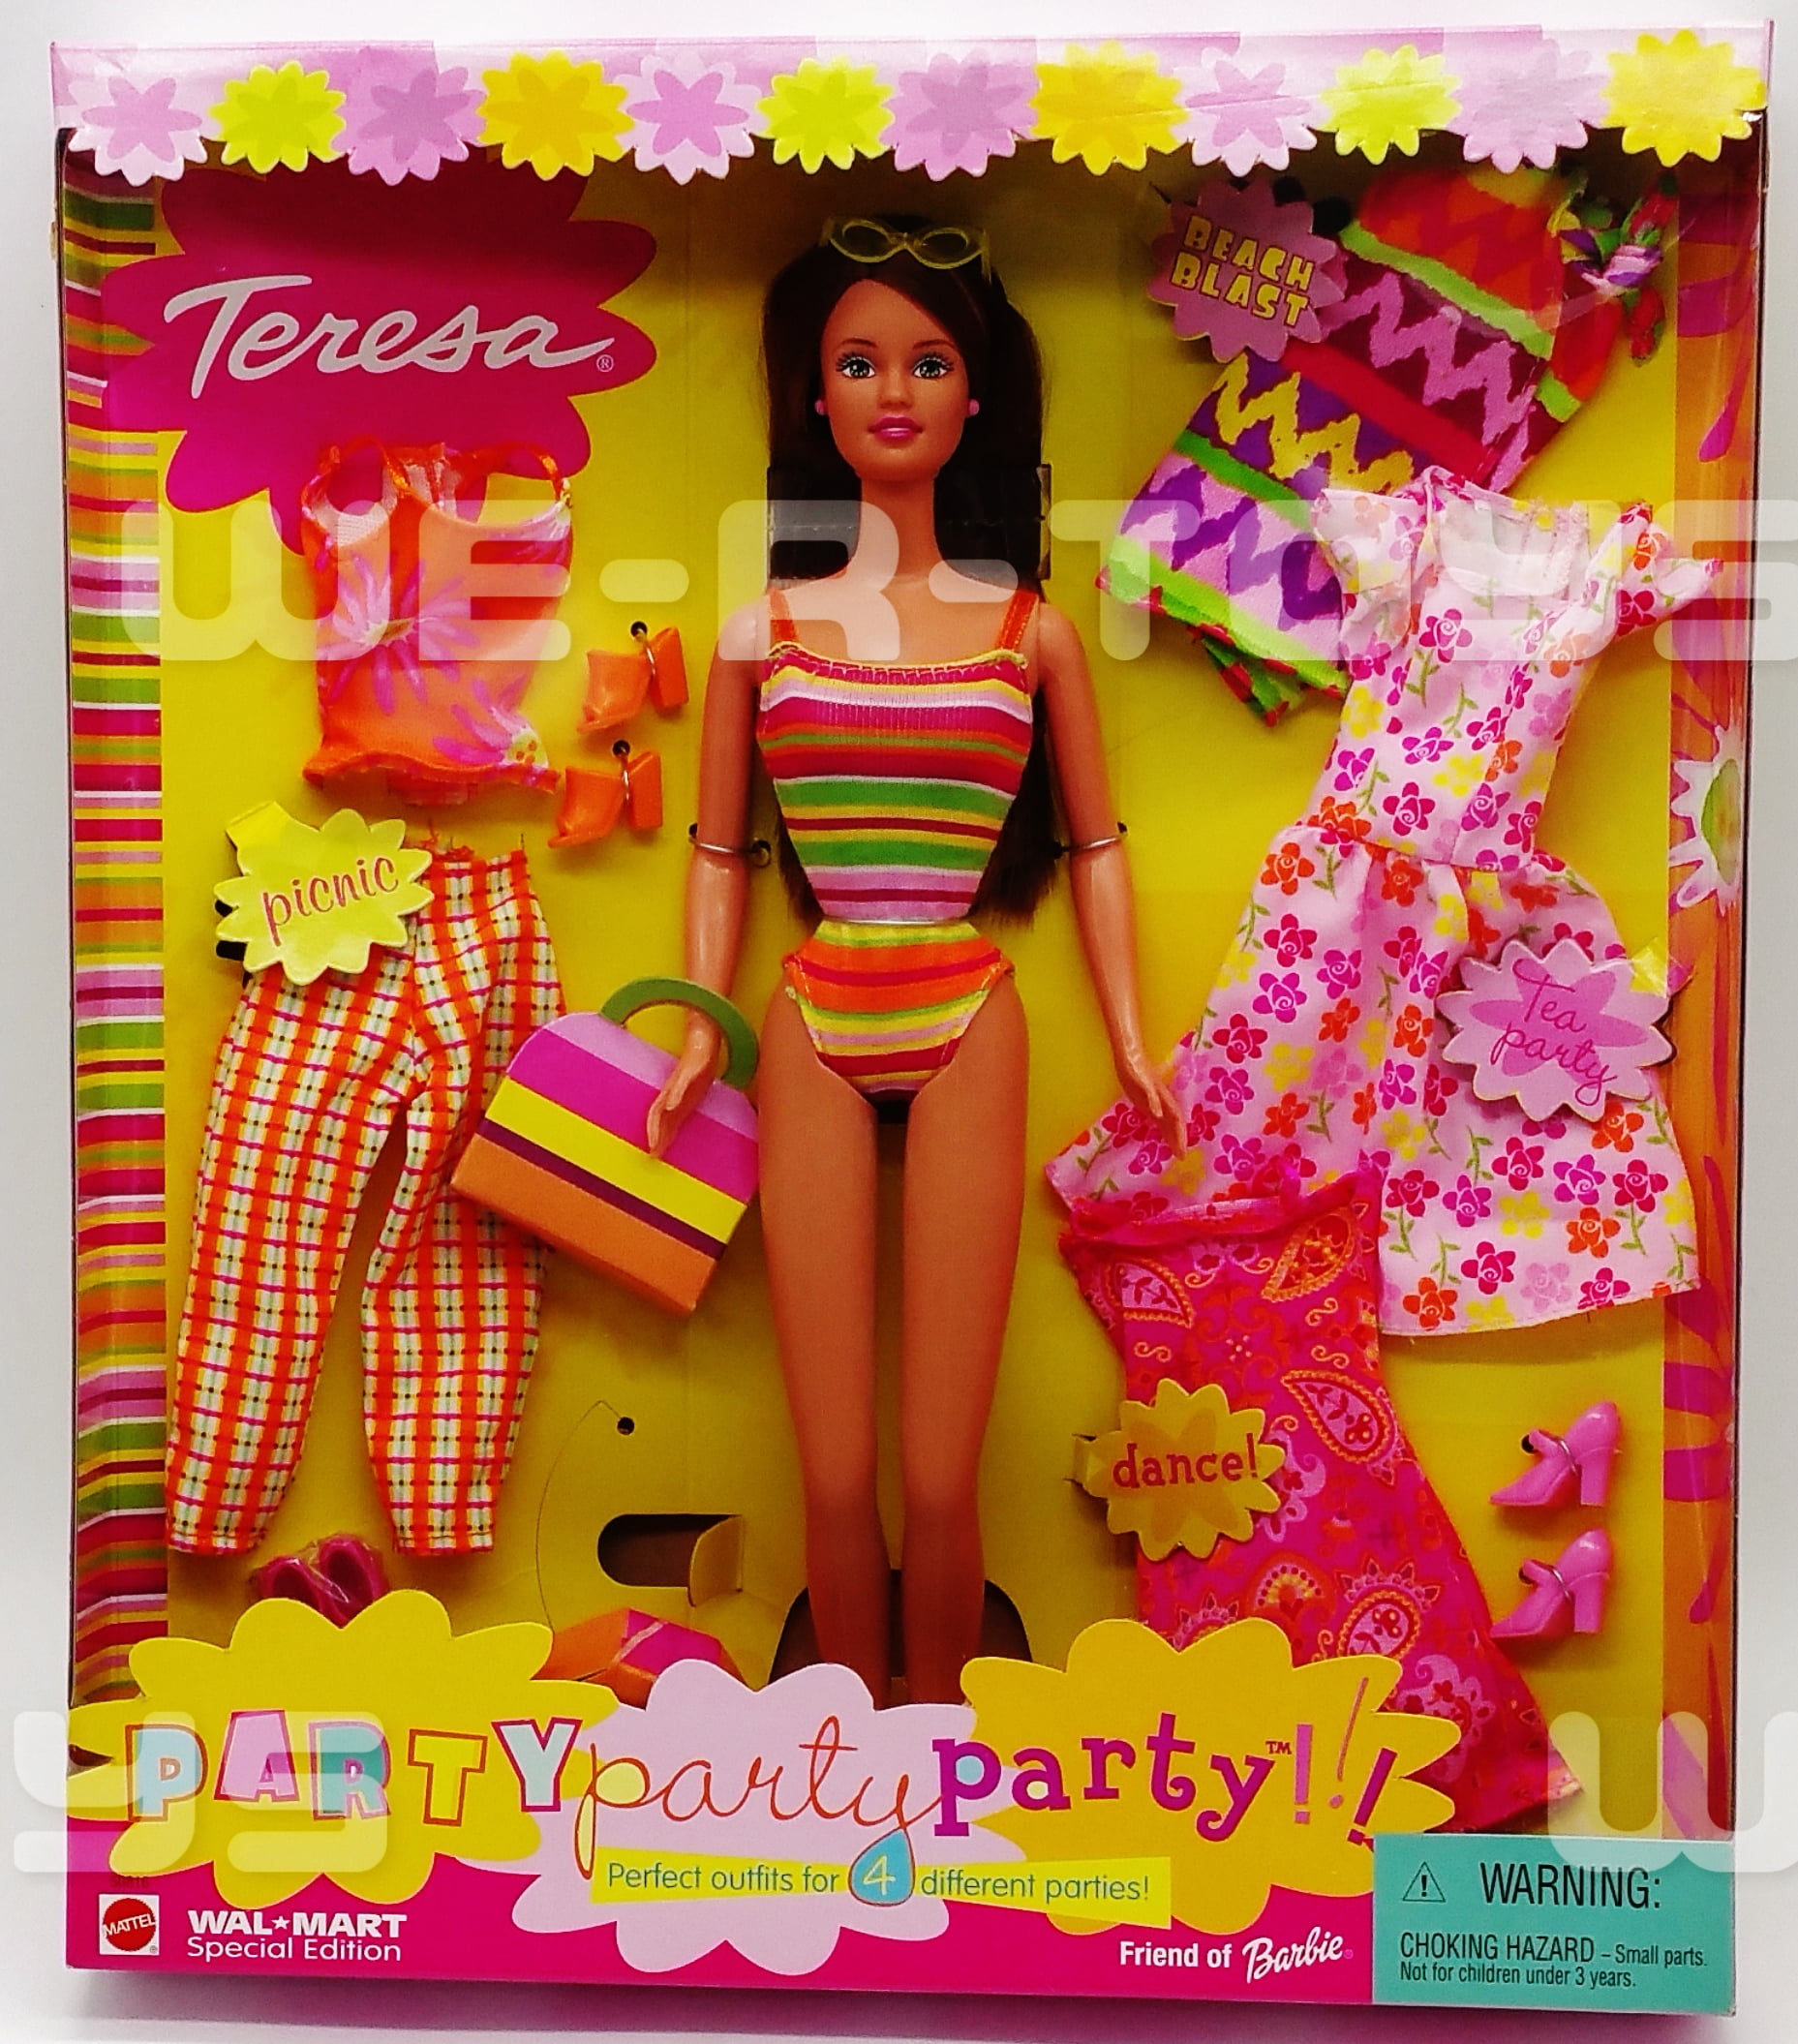 Party Party Party Teresa Friend of Barbie(バービー) 2001 Doll Item